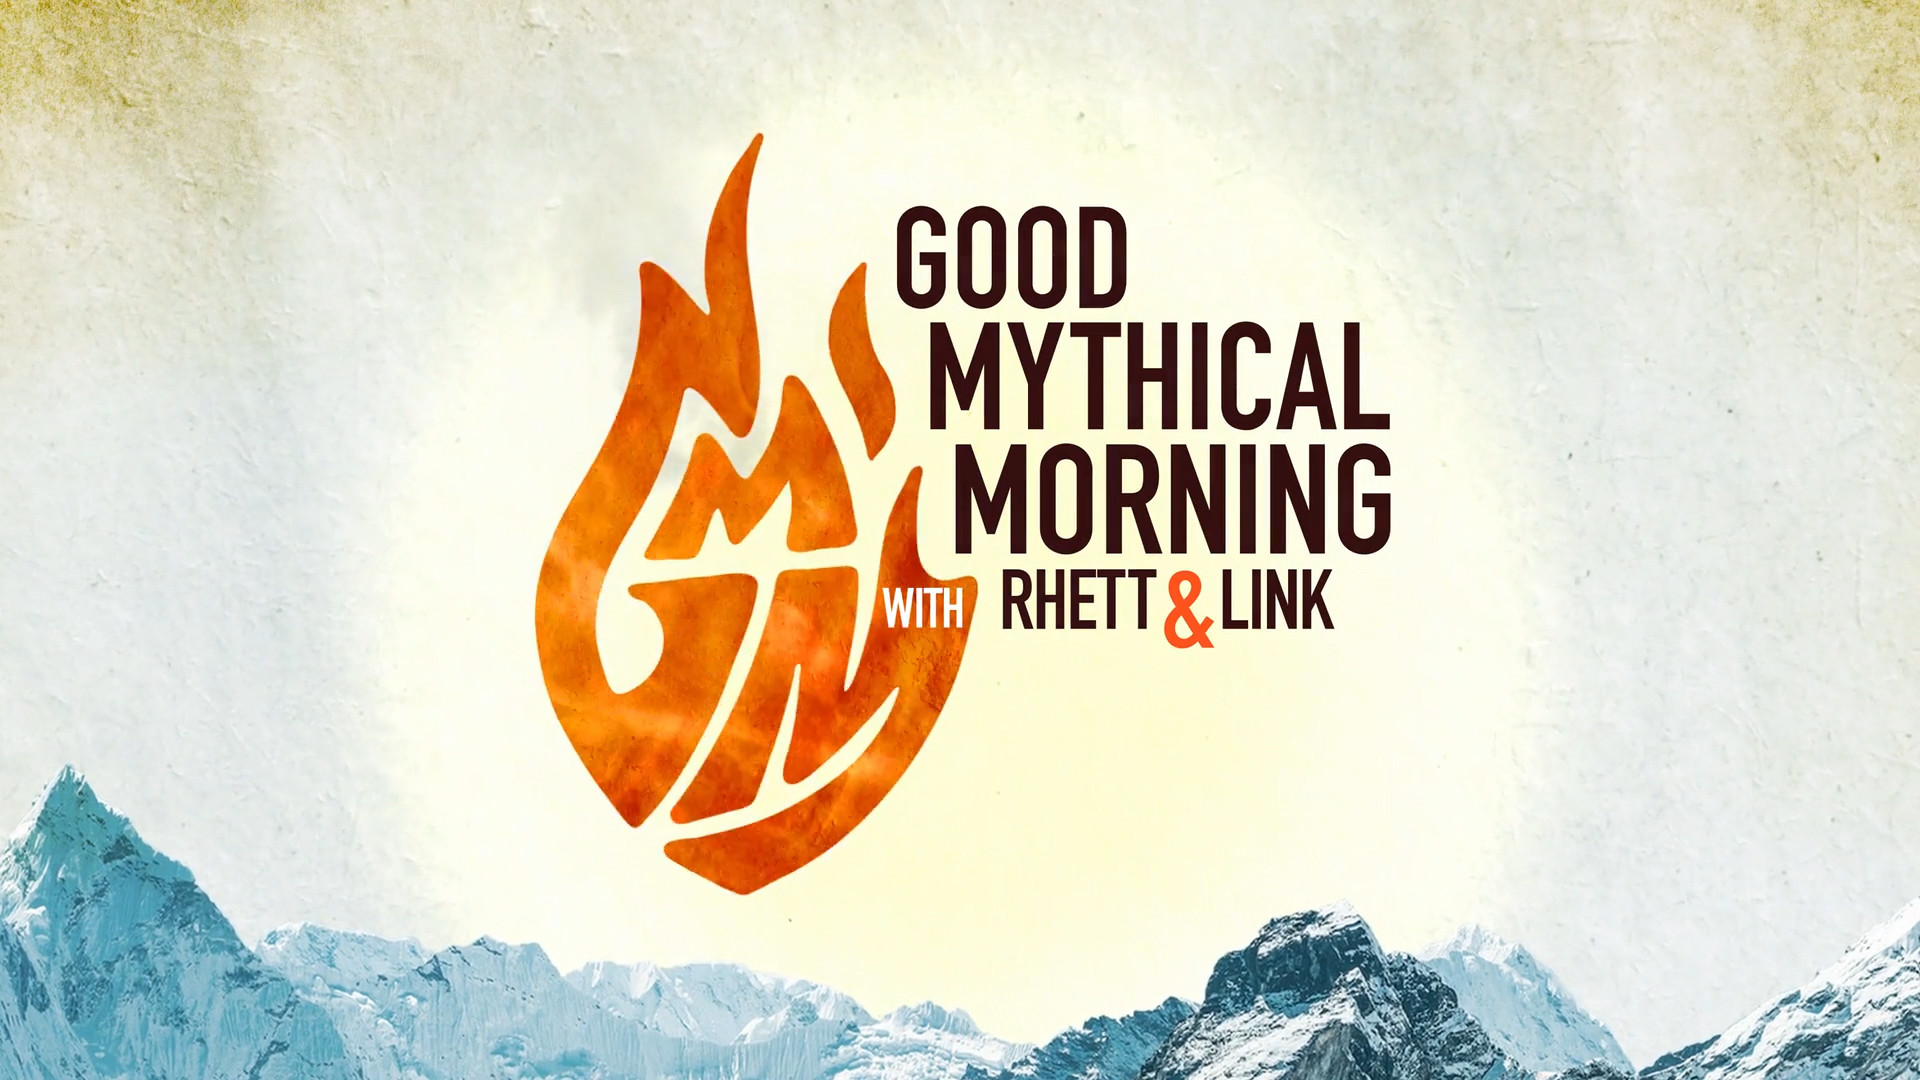 1920x1080 Good Mythical Morning (often abbreviated as GMM, officially named Good  Mythical Morning With Rhett & Link) is a daytime talk show hosted by Rhett  and Link ...